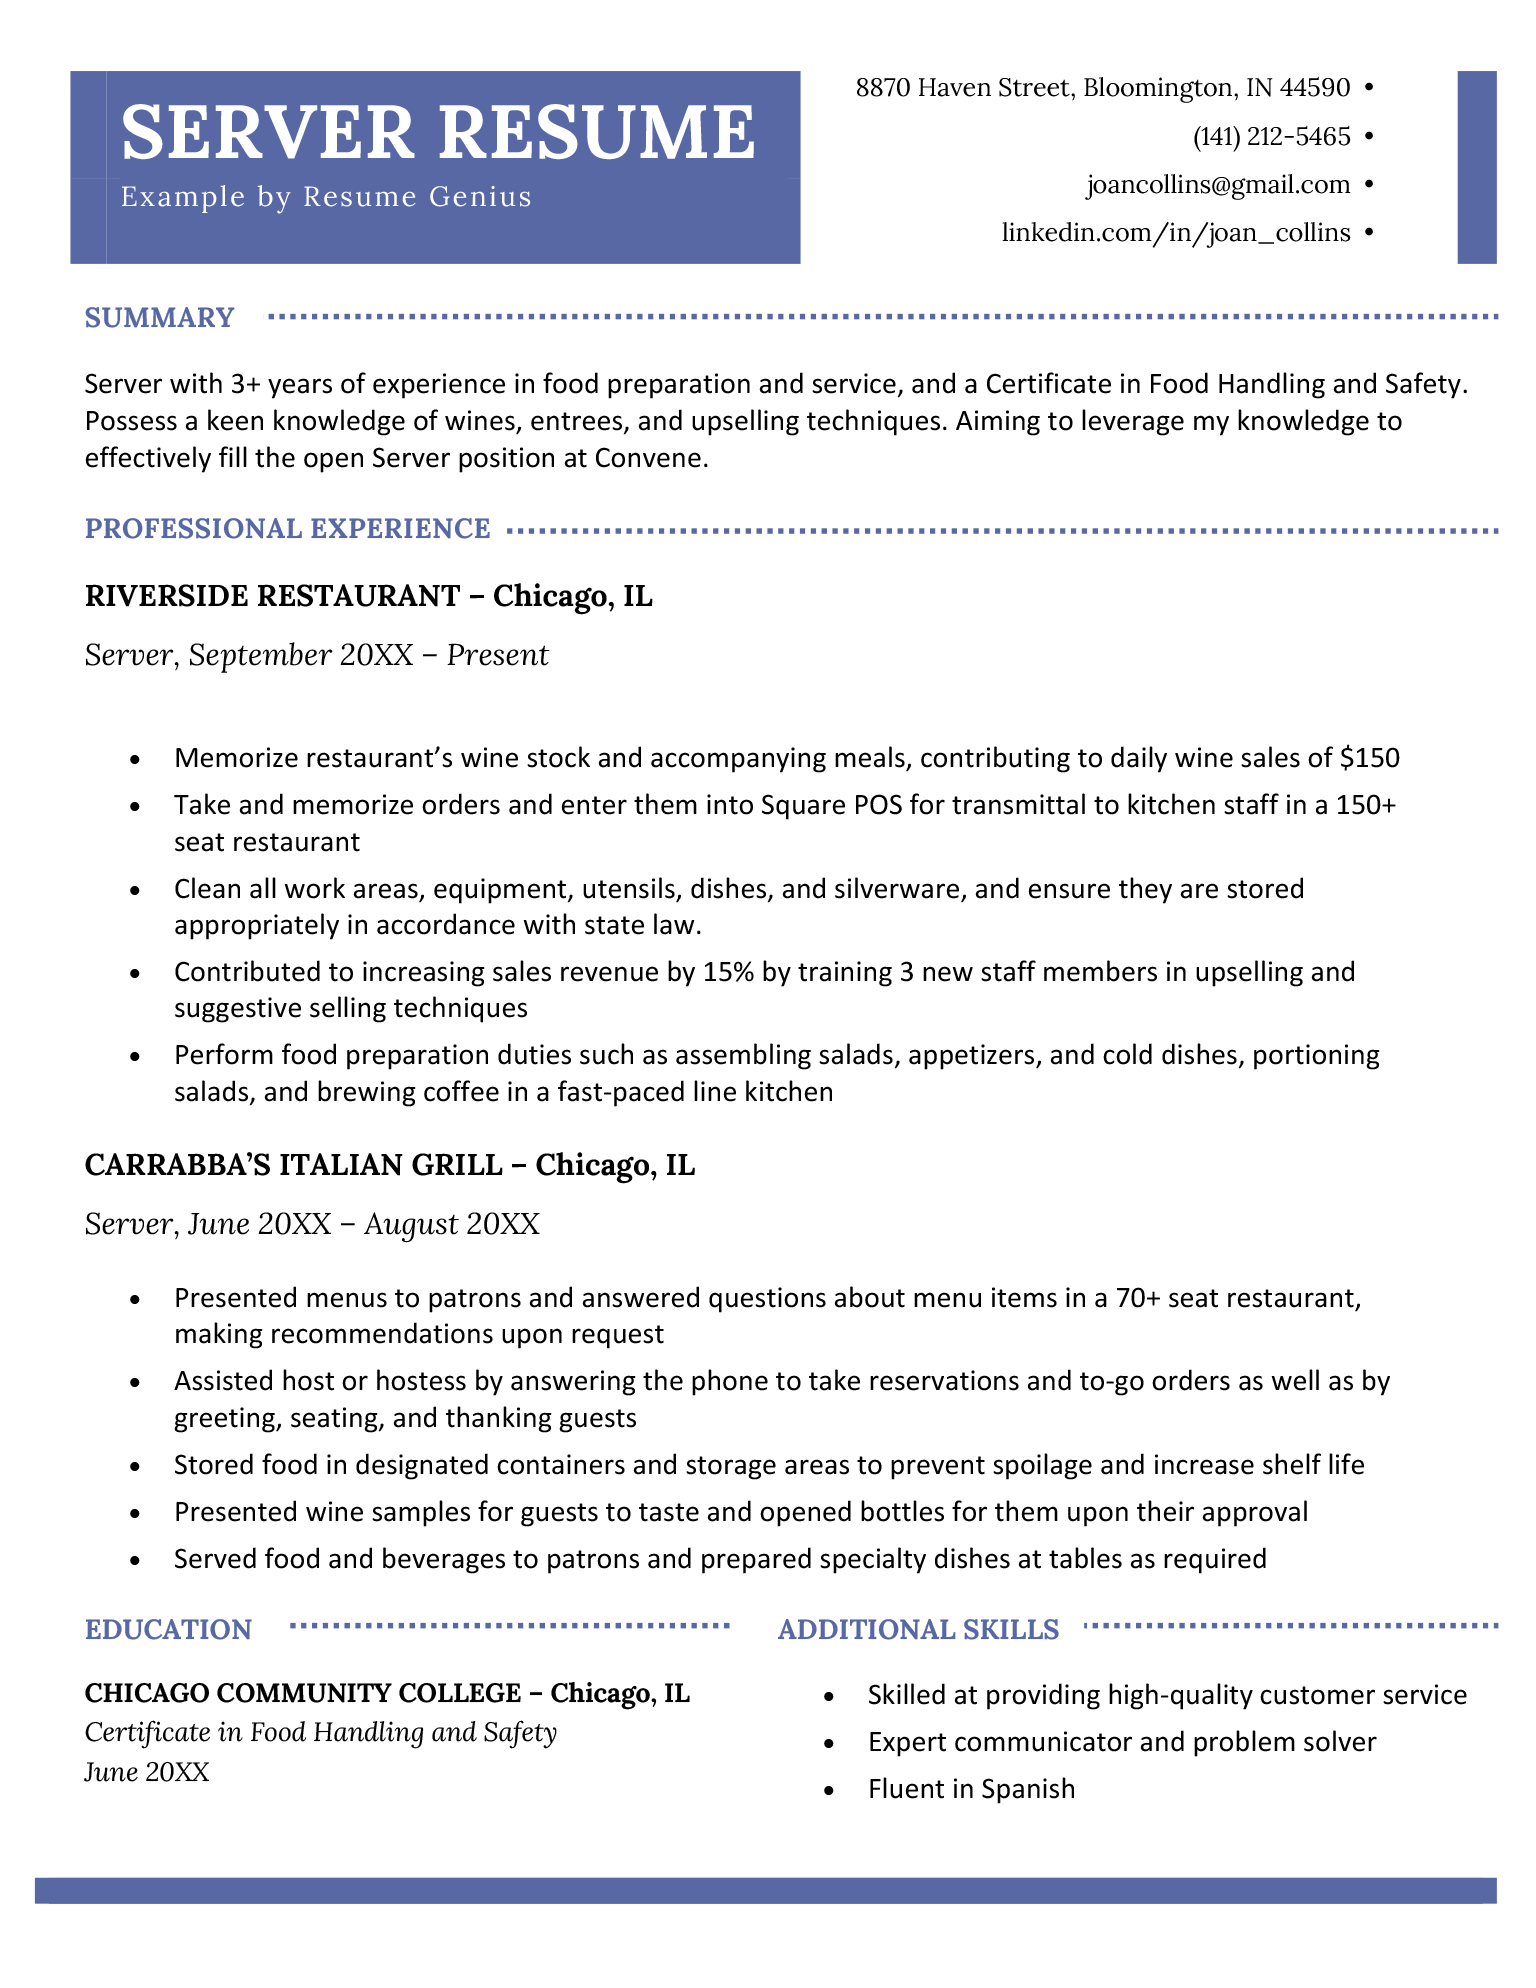 Server resume example with a traditional blue layout